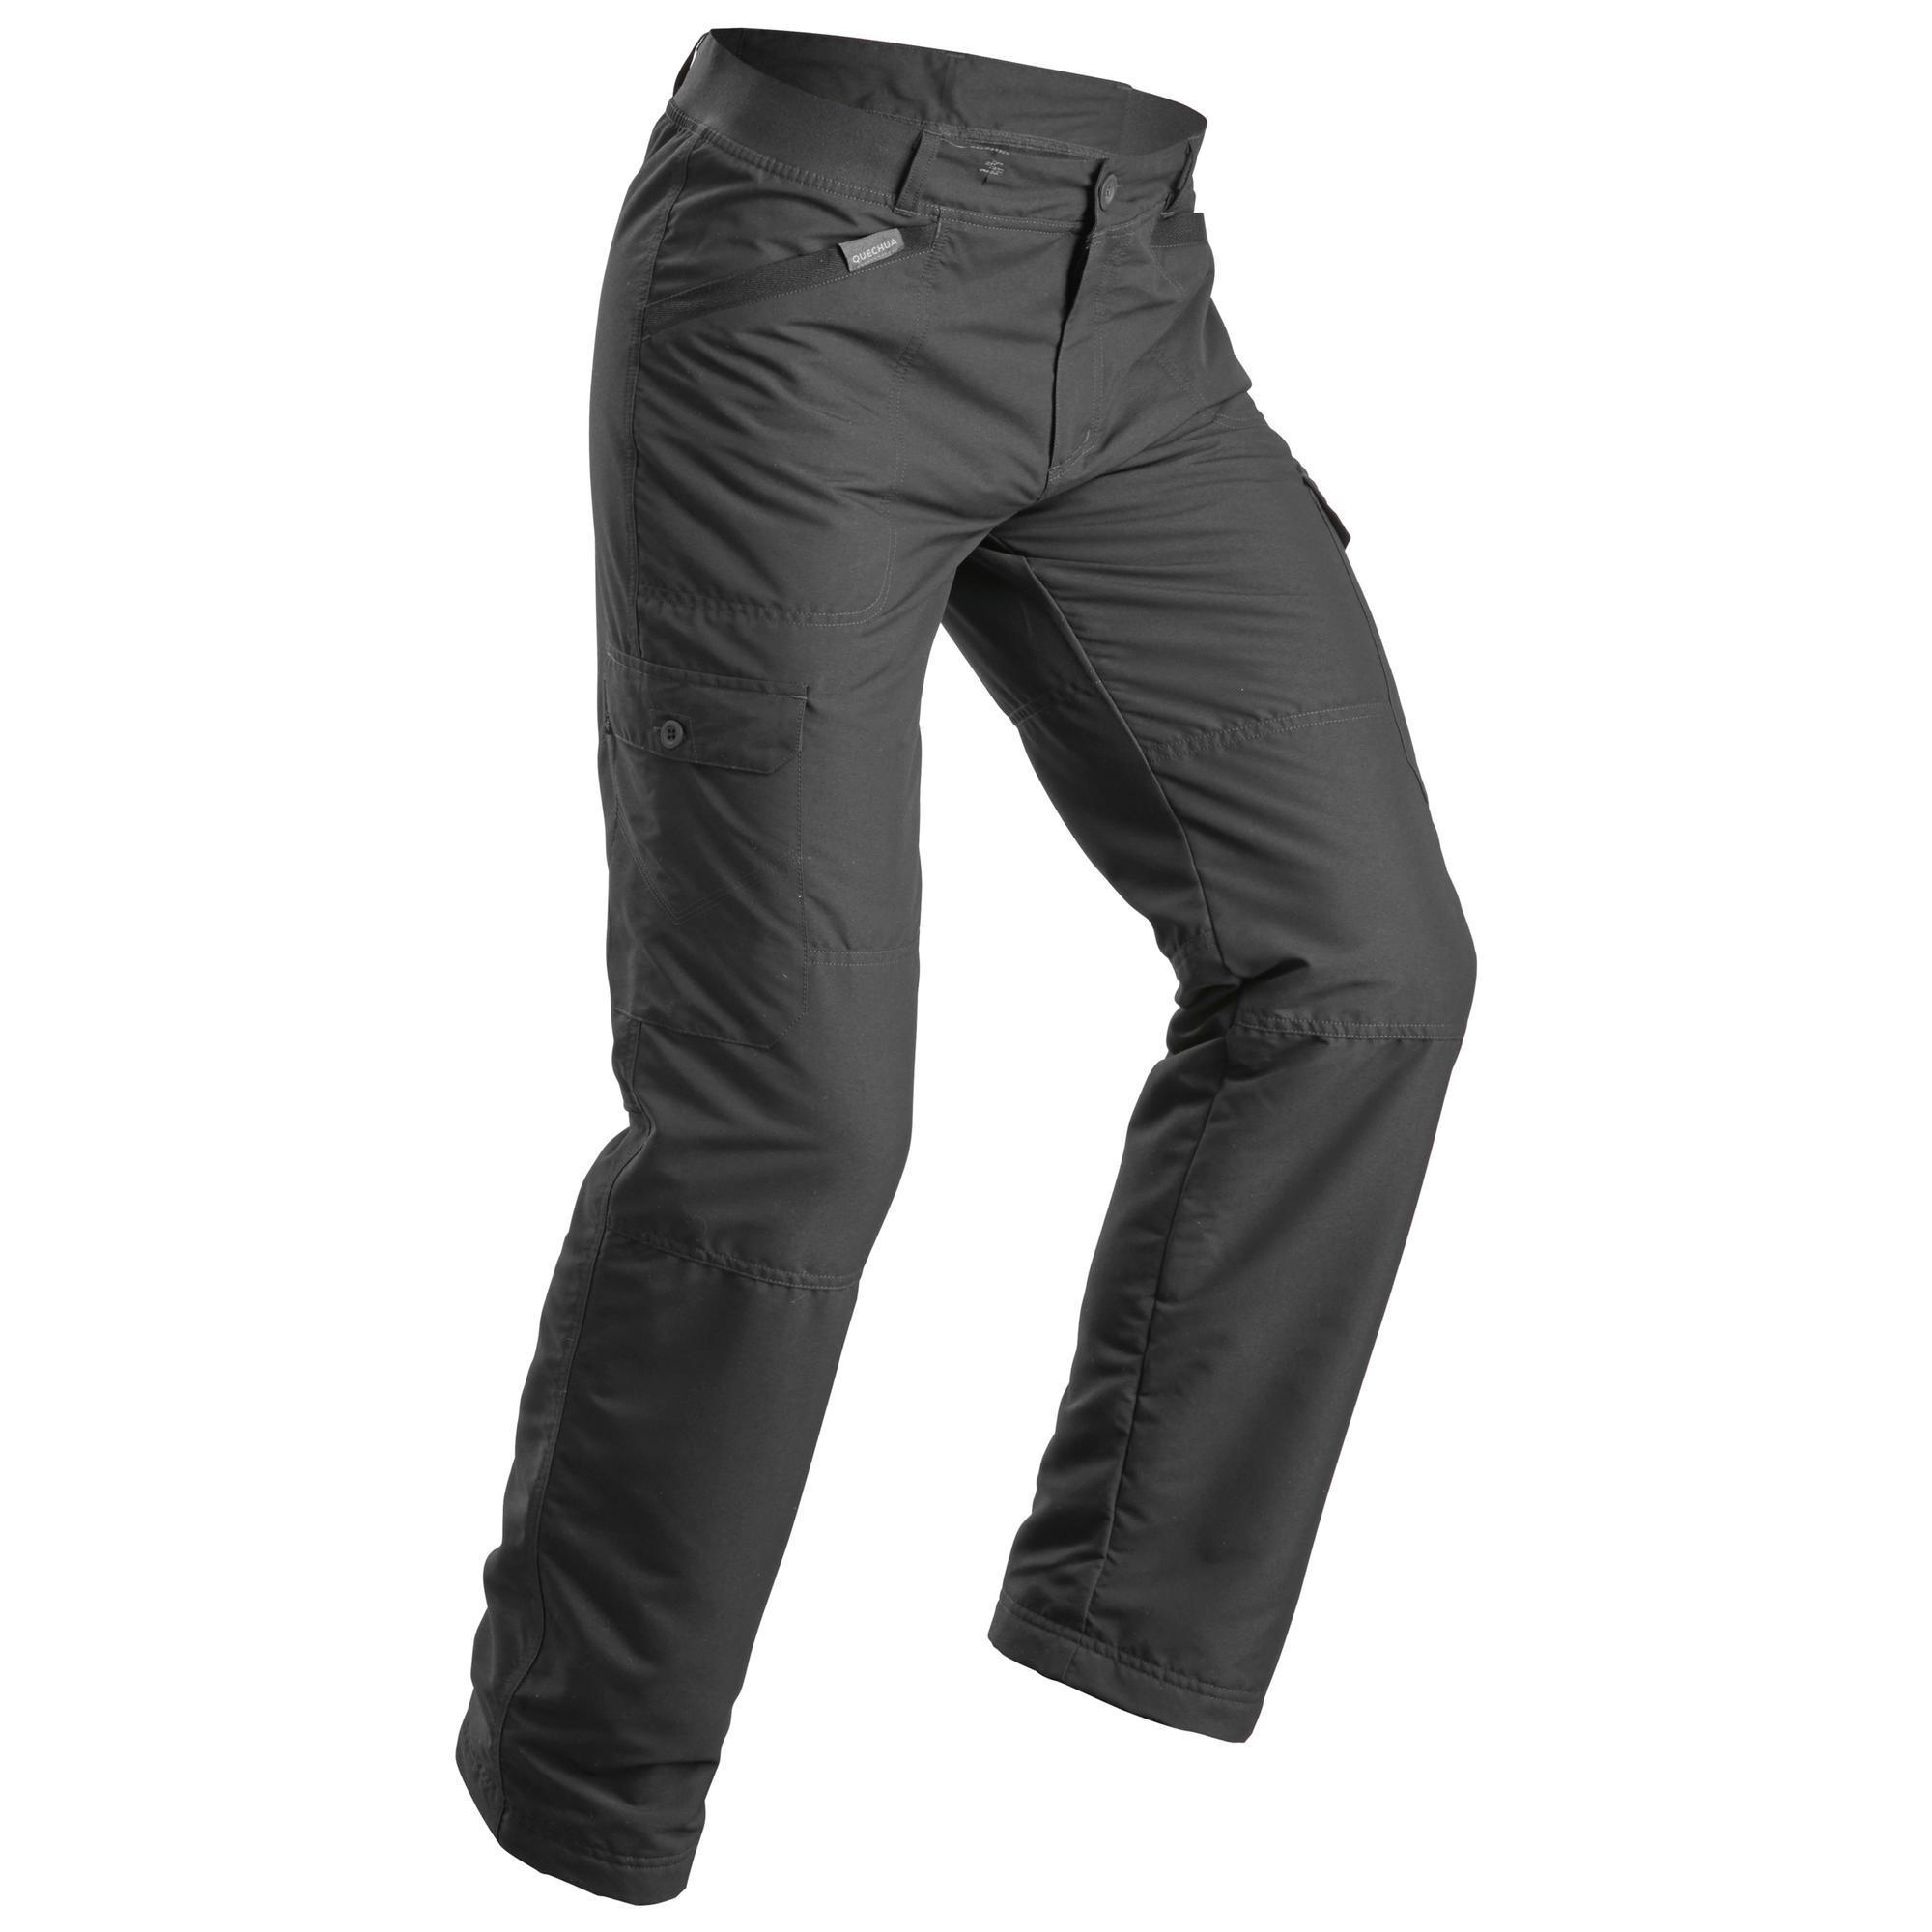 men's thermal lined walking trousers